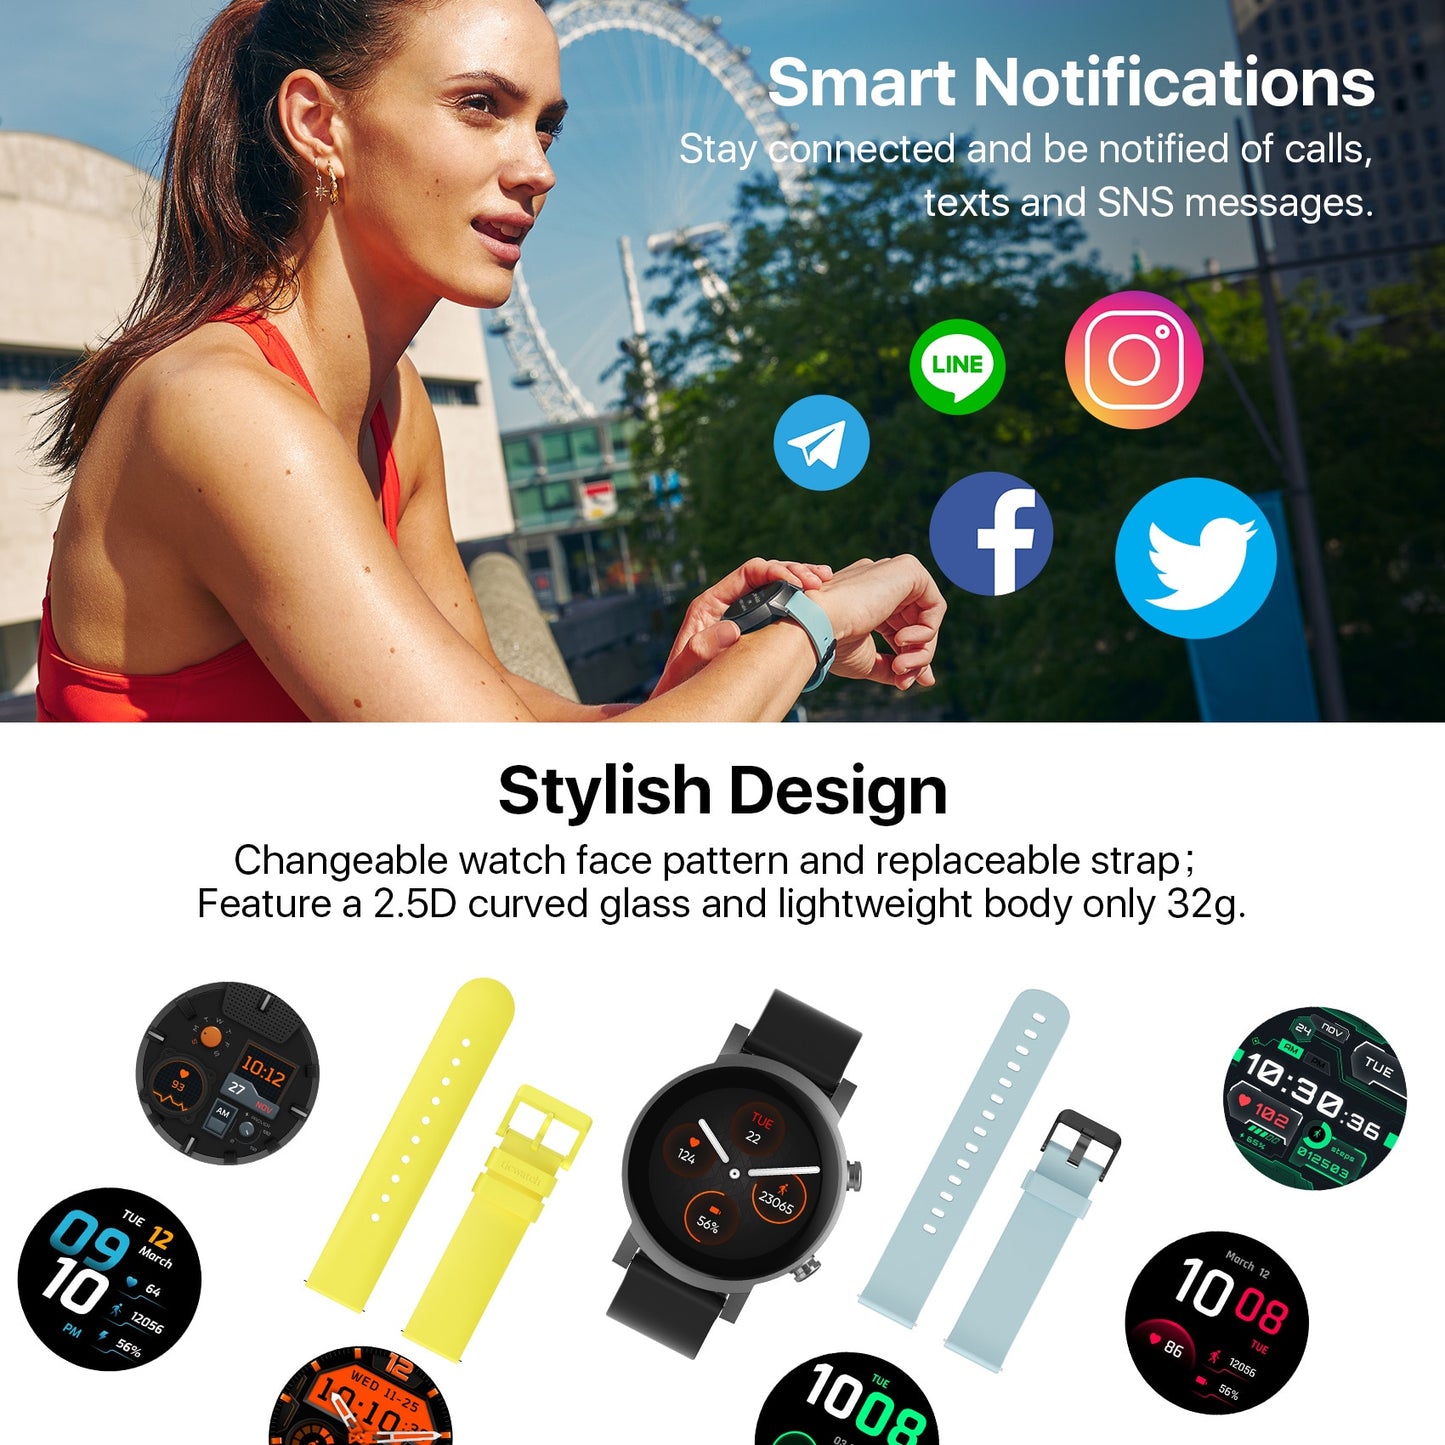 Ticwatch E3 Wear OS Smartwatch for Men and Women Snapdragon 4100 8GB ROM IP68 Waterproof Google Pay iOS and Android Compatible